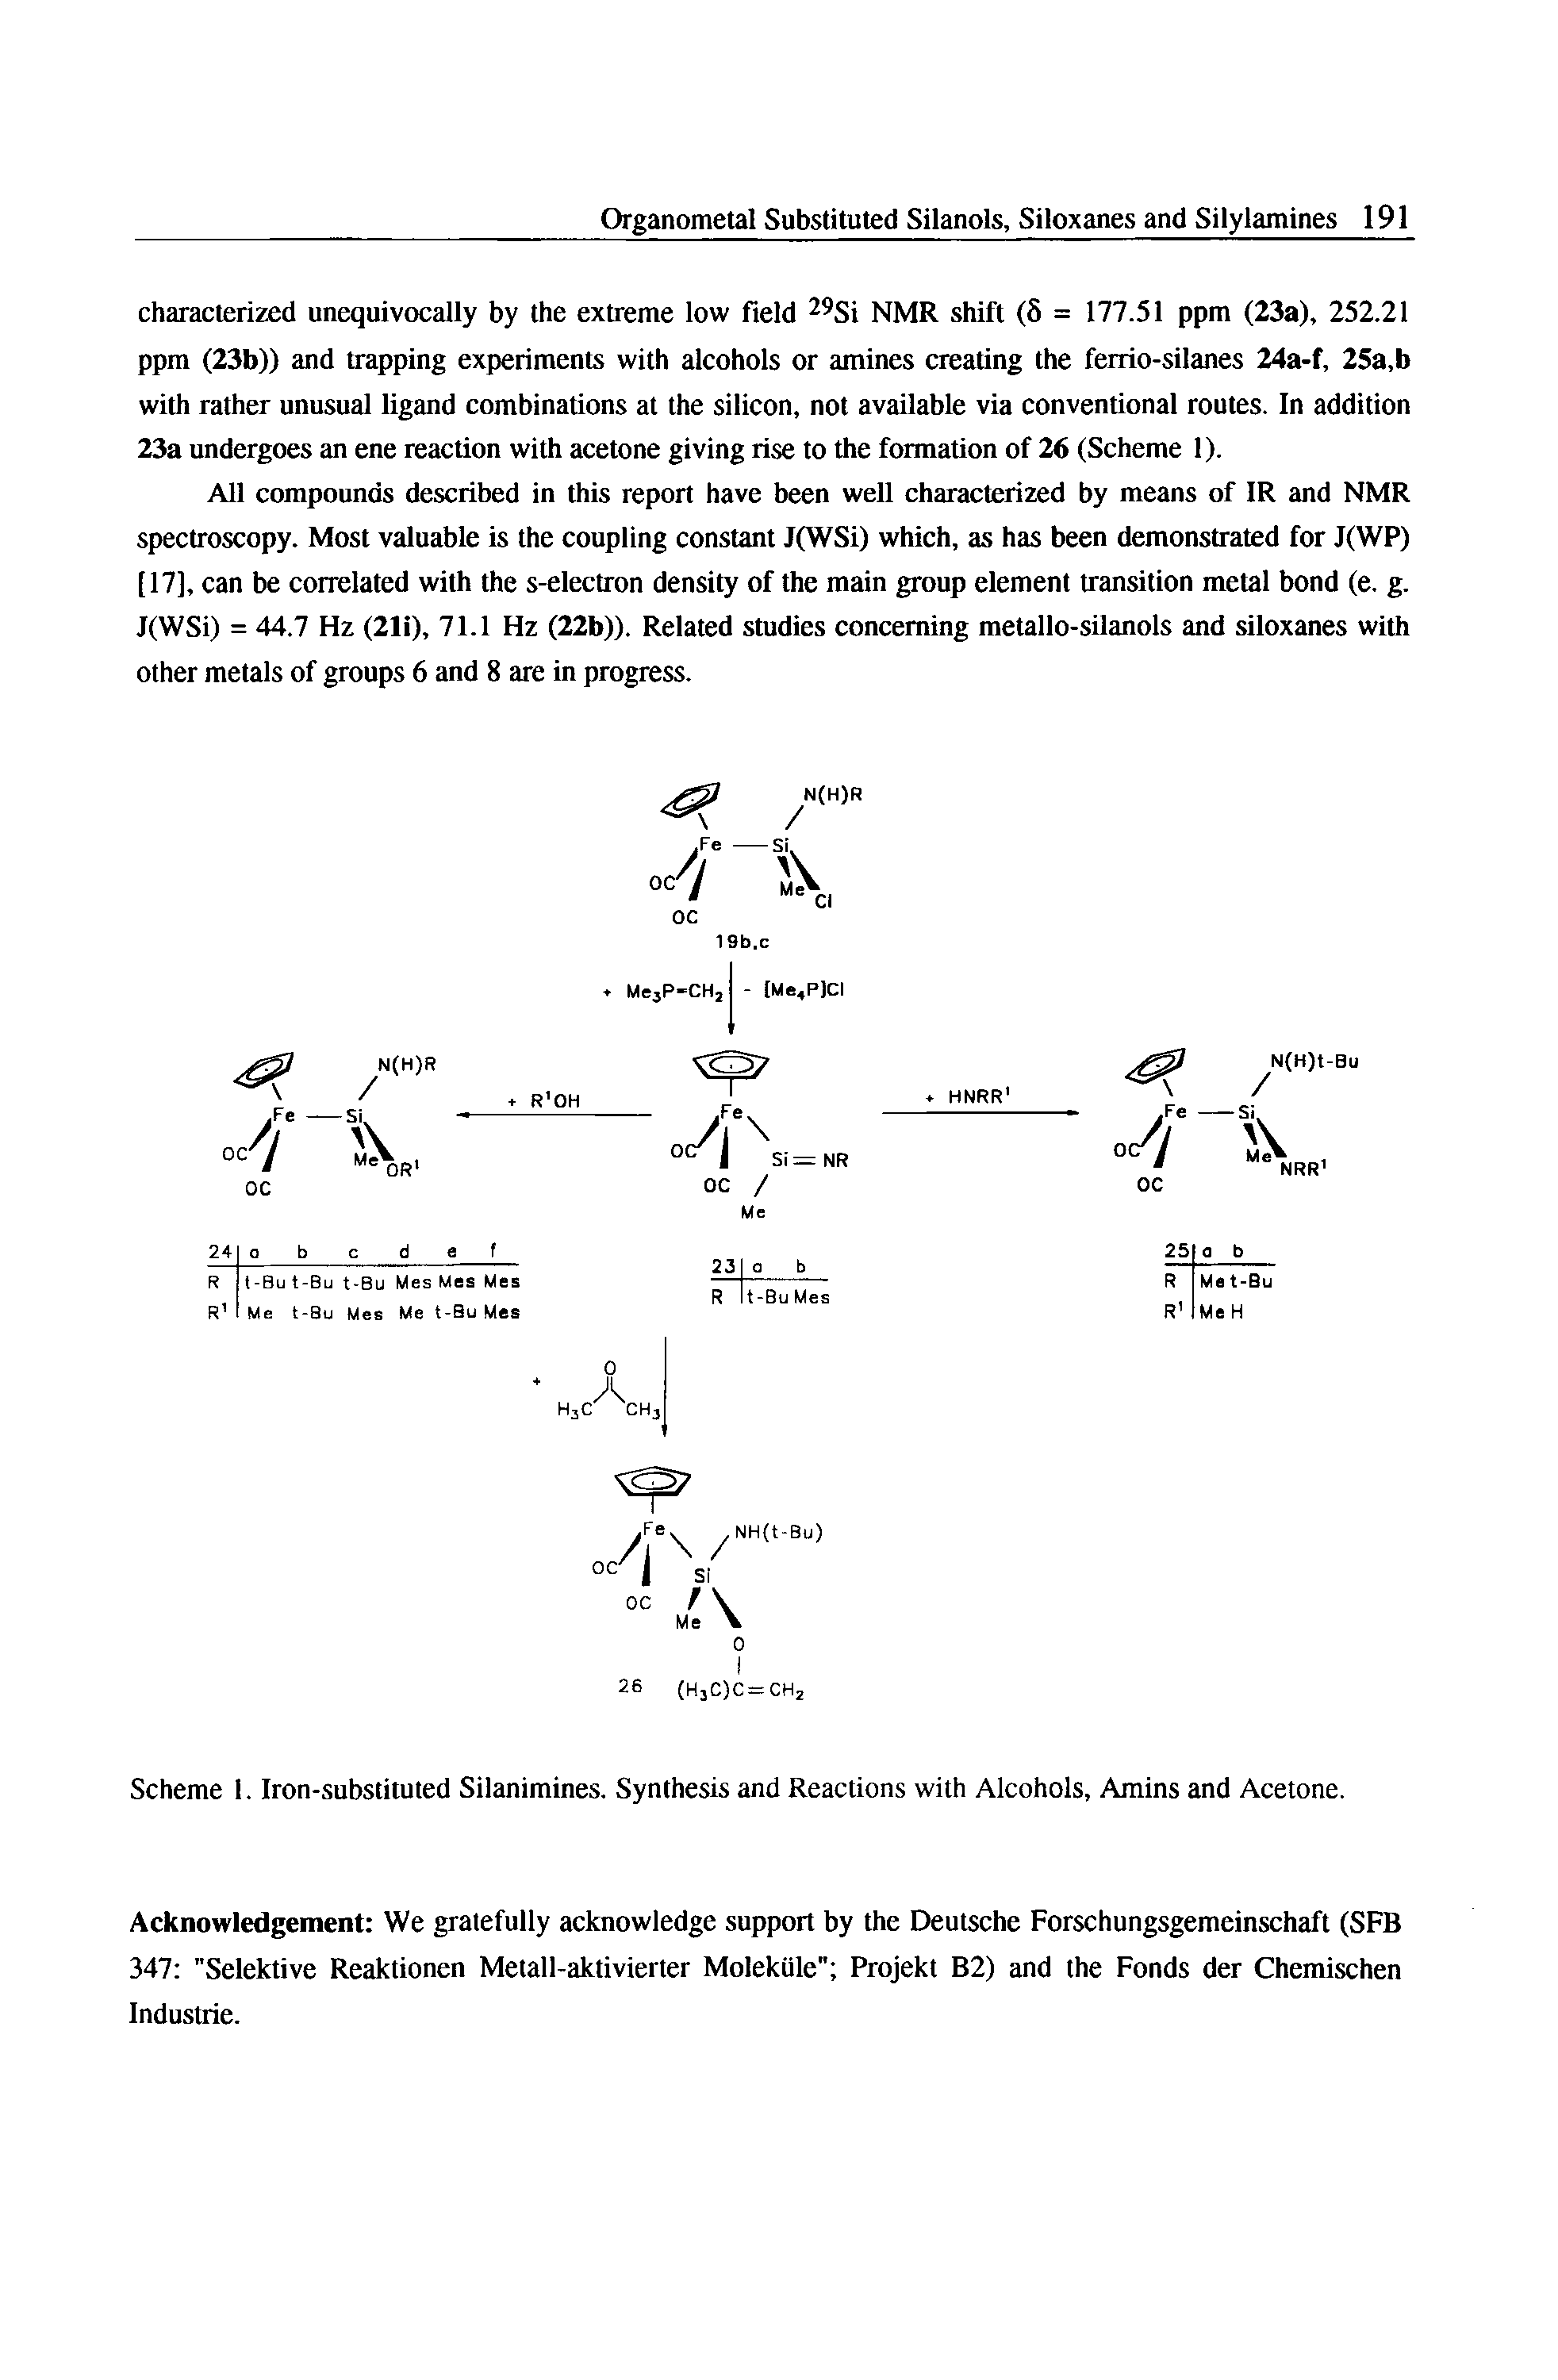 Scheme 1. Iron-substituted Silanimines. Synthesis and Reactions with Alcohols, Amins and Acetone.